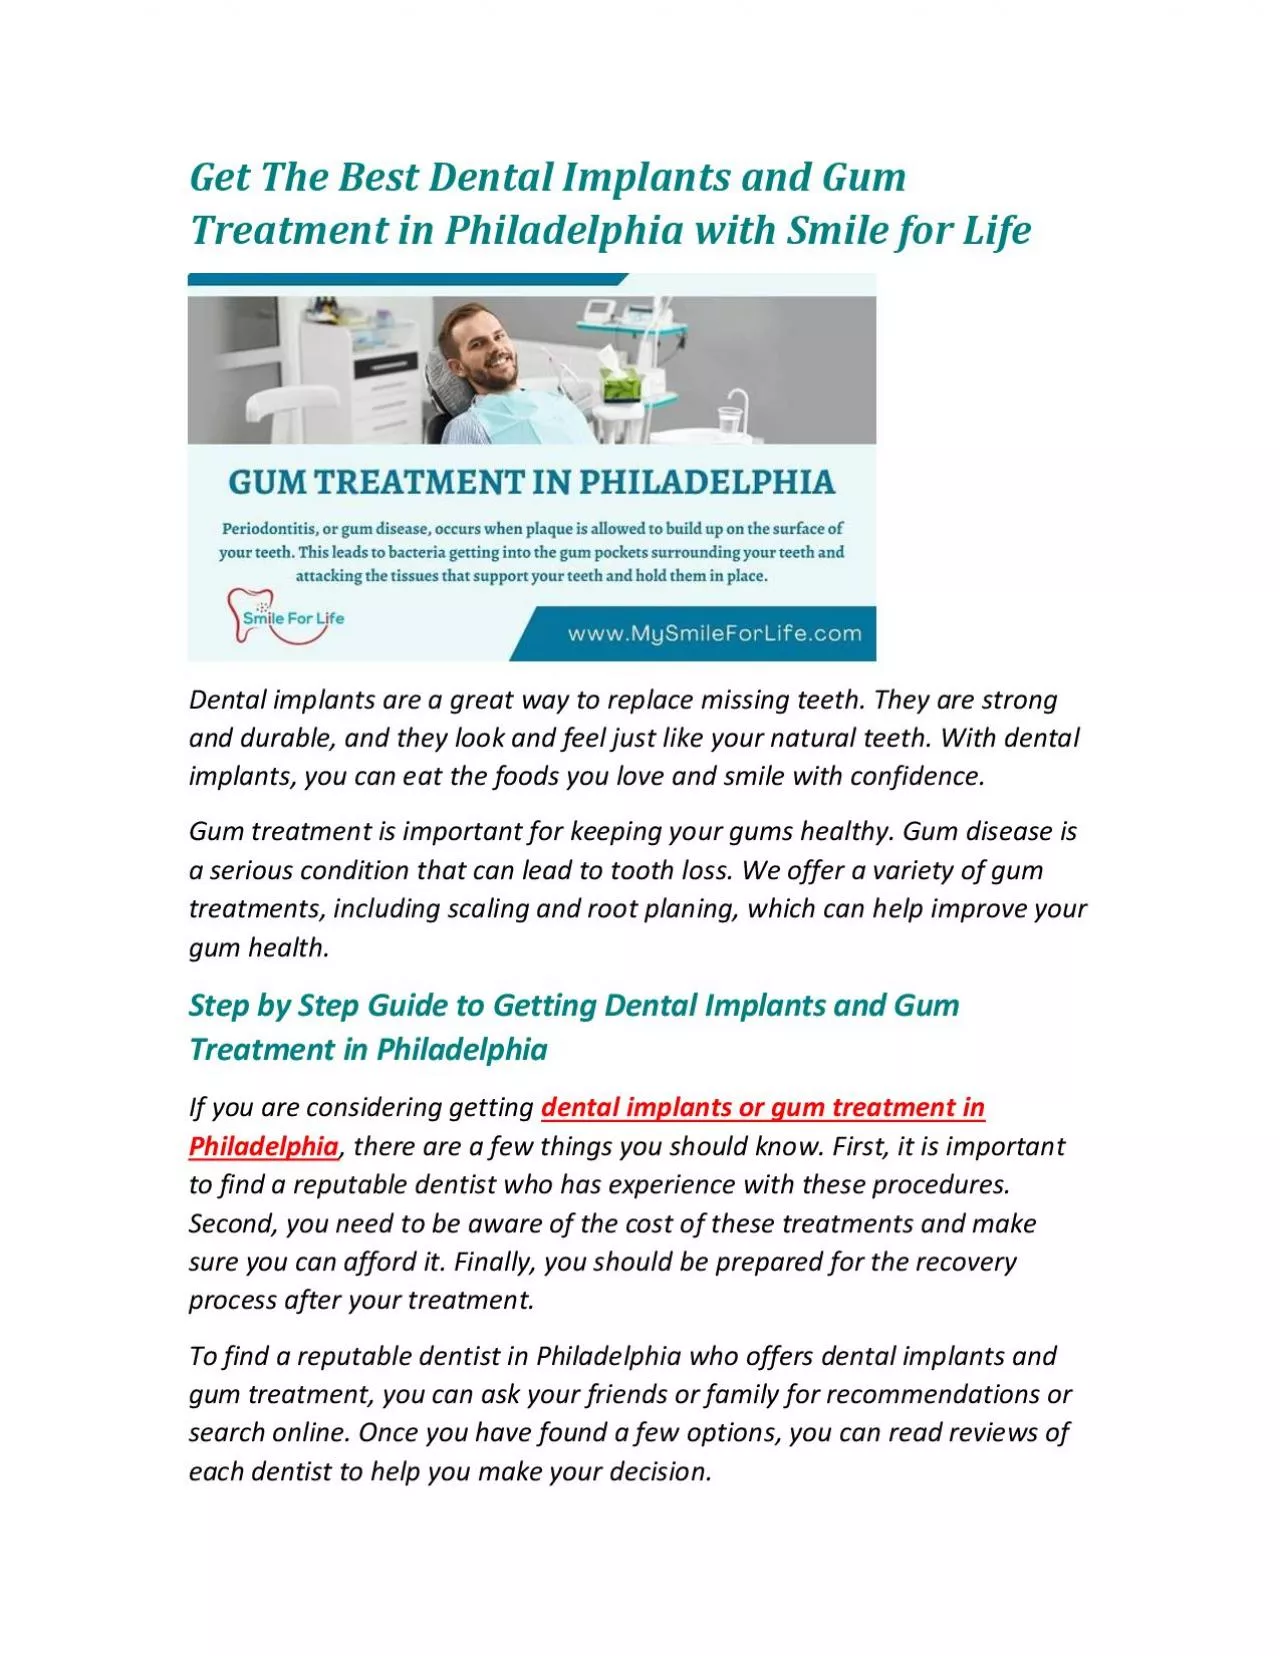 Get The Best Dental Implants and Gum Treatment in Philadelphia with Smile for Life